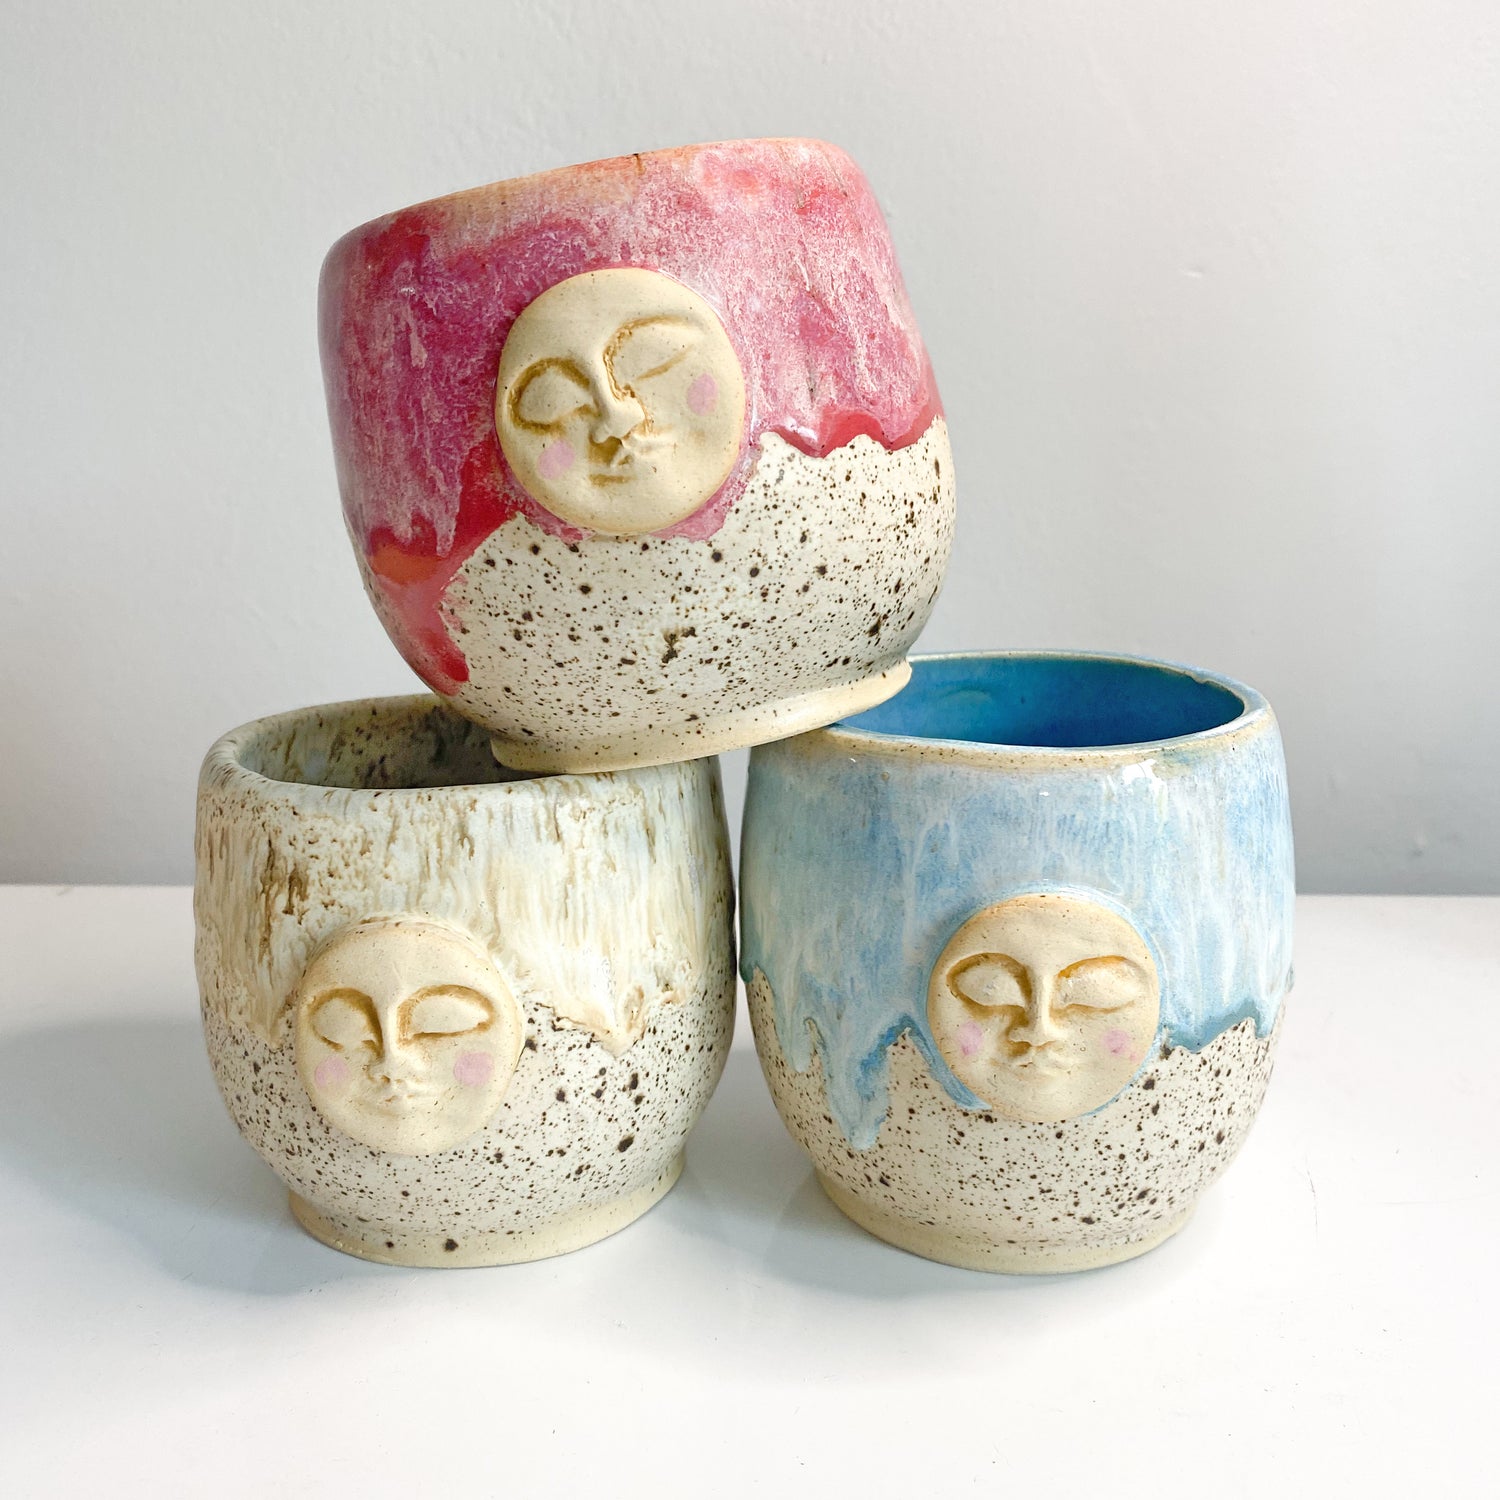 full moon cups made of stoneware clay. Three different variations raspberry, blue and sand. Handmade in South Florida by Island Girl Pottery